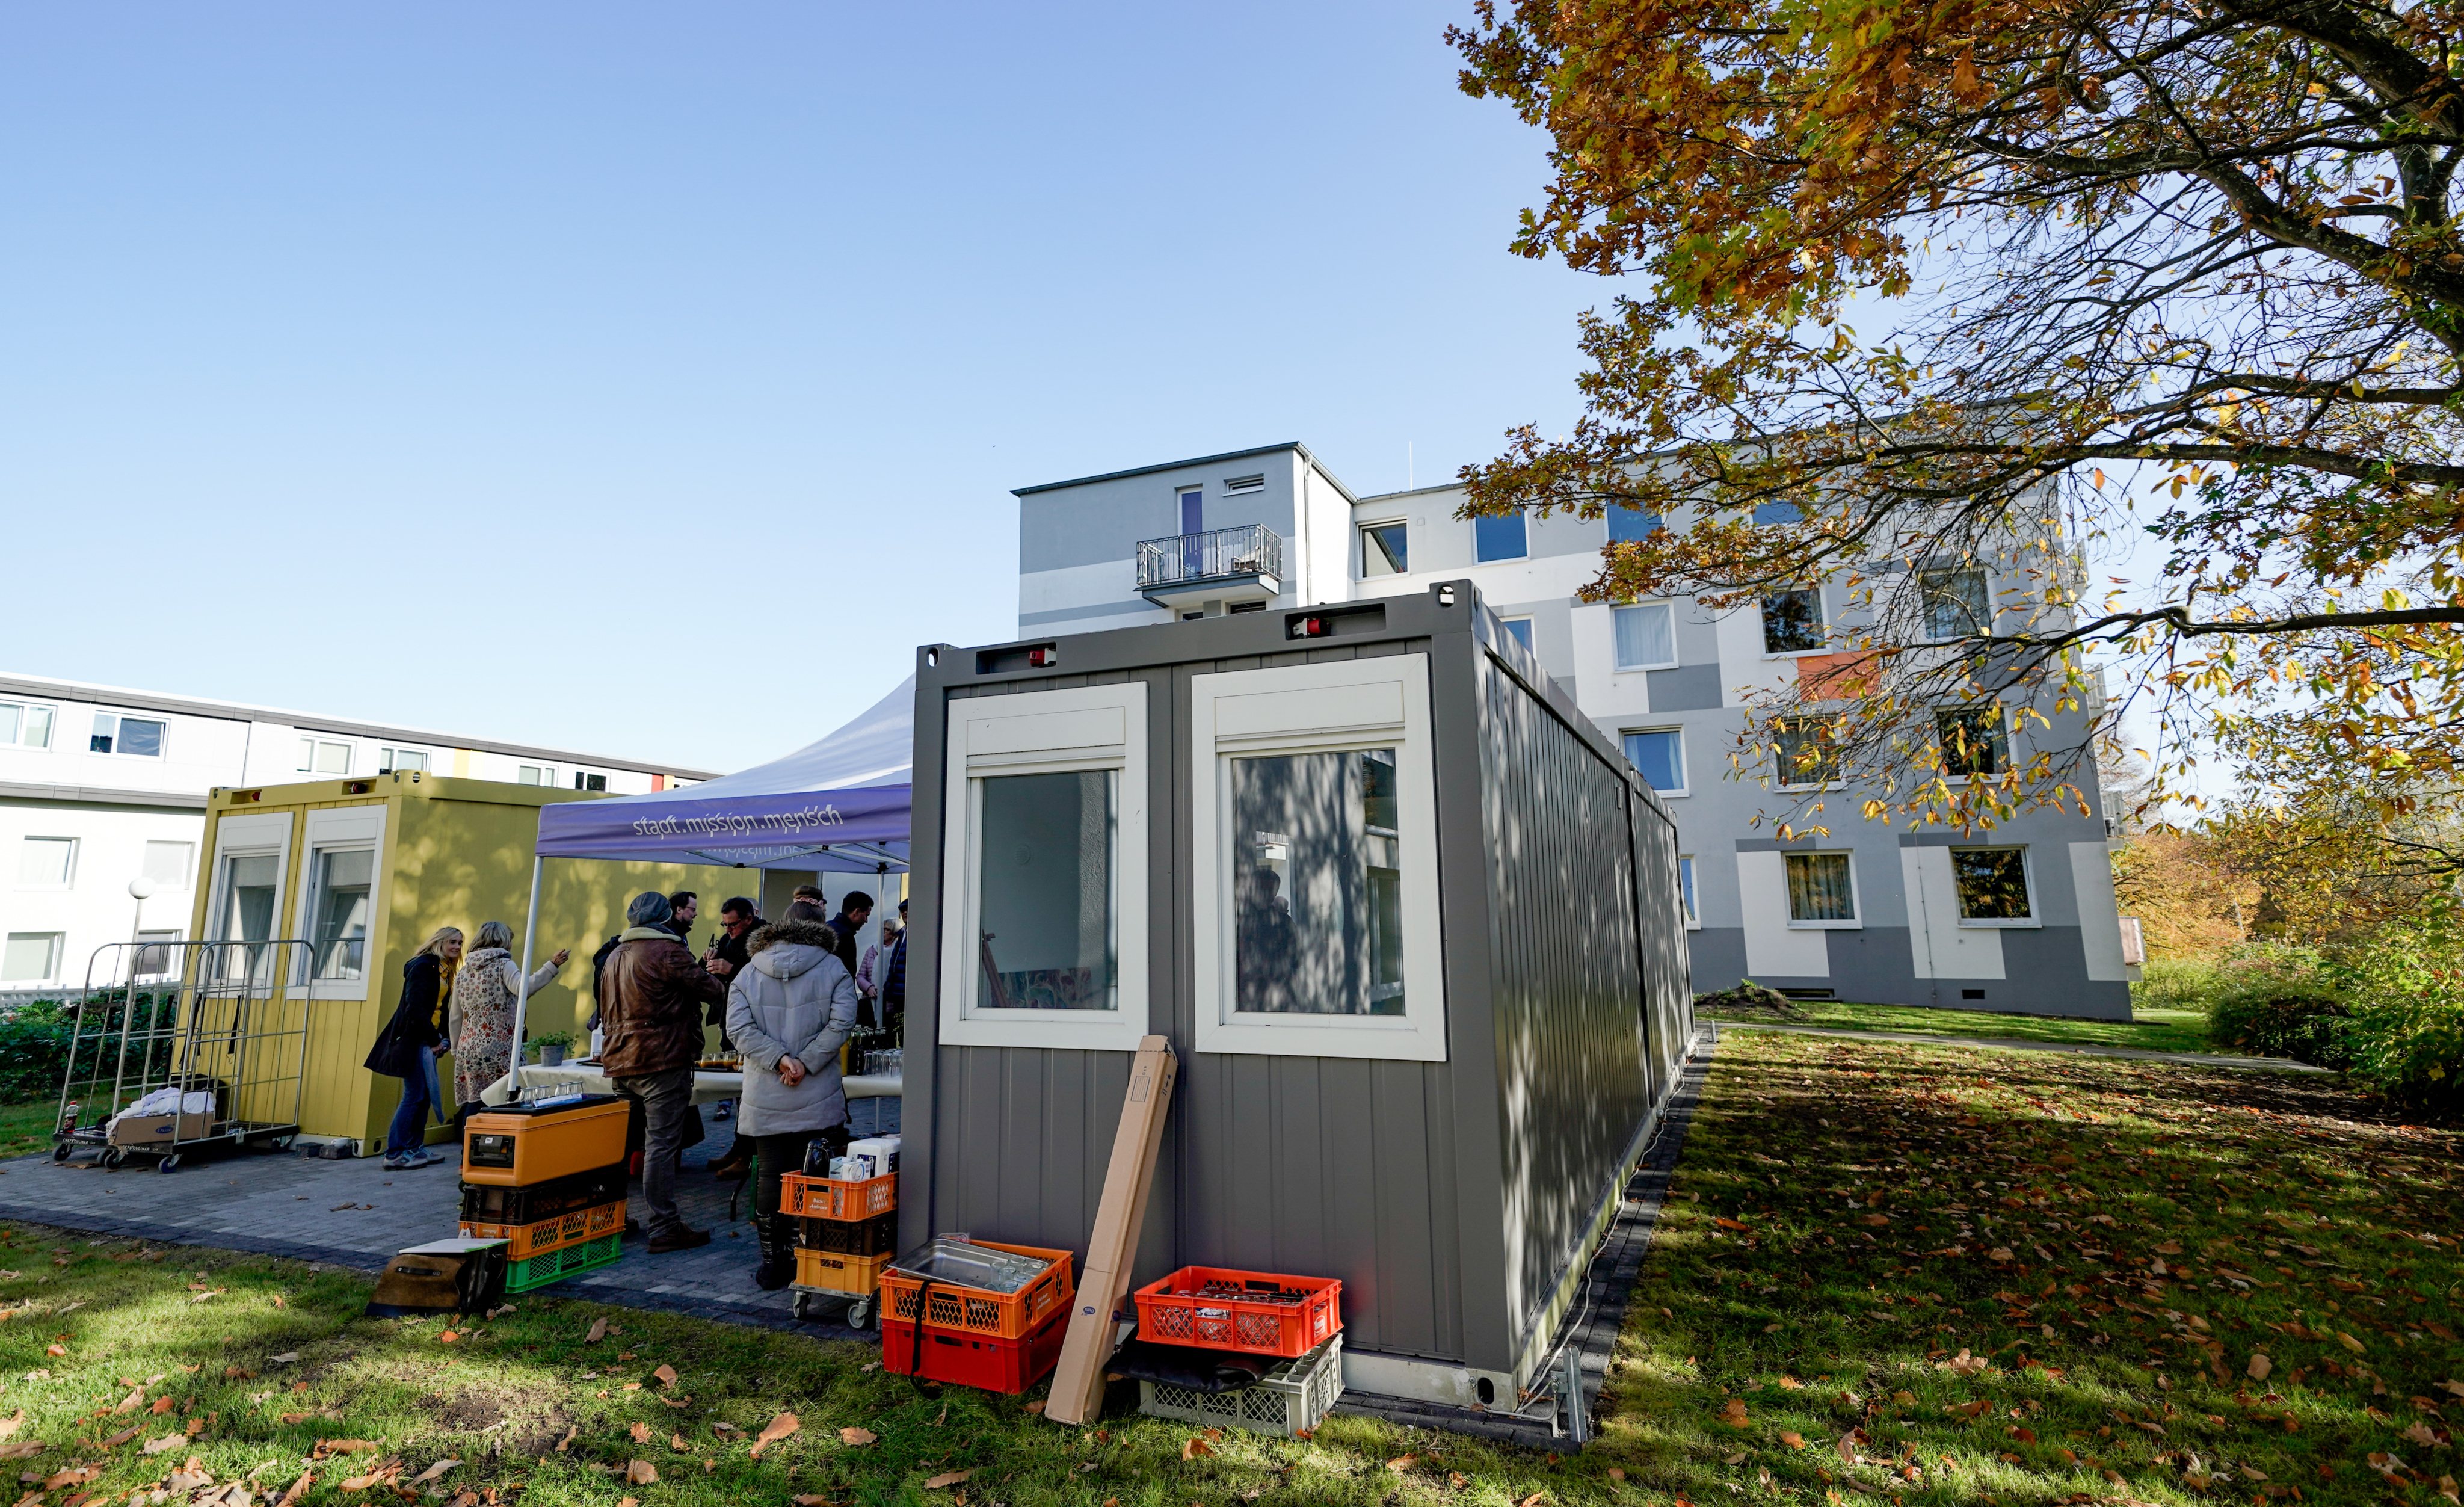 Tiny Houses for the homeless and short-term solution for students